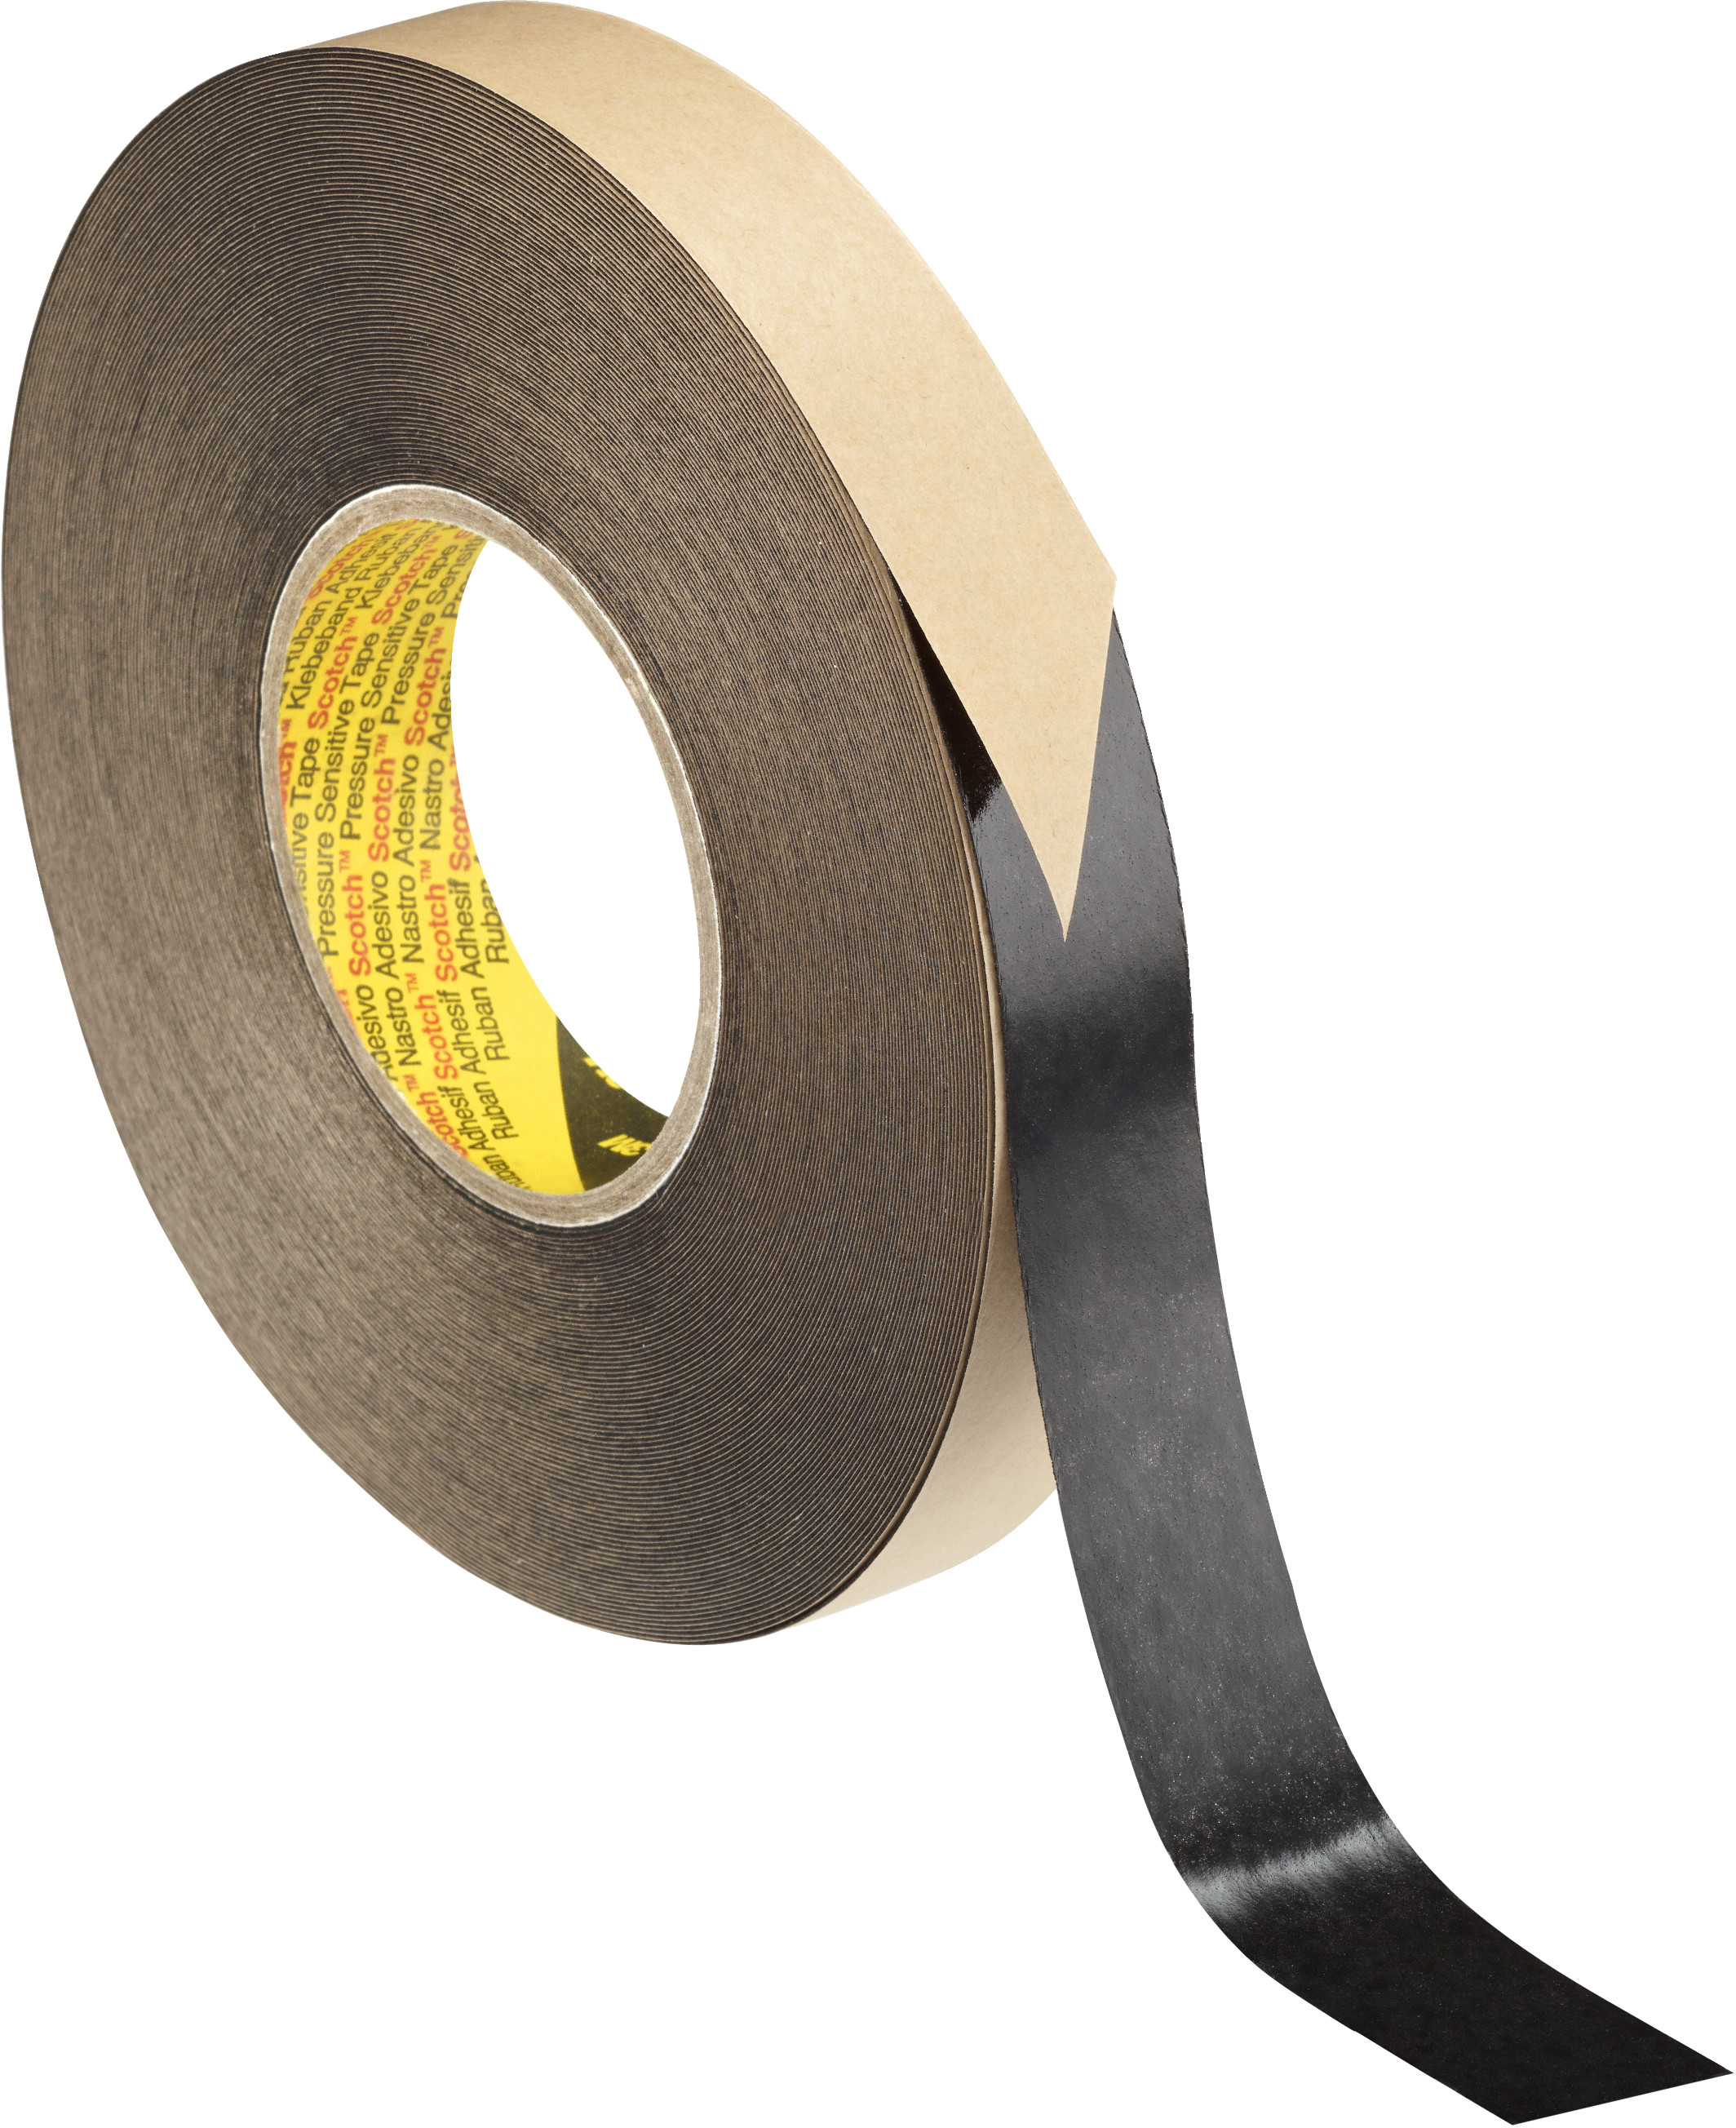 Product Number 9343 | 3M™ Conformable Sound Management Film Tape 9343